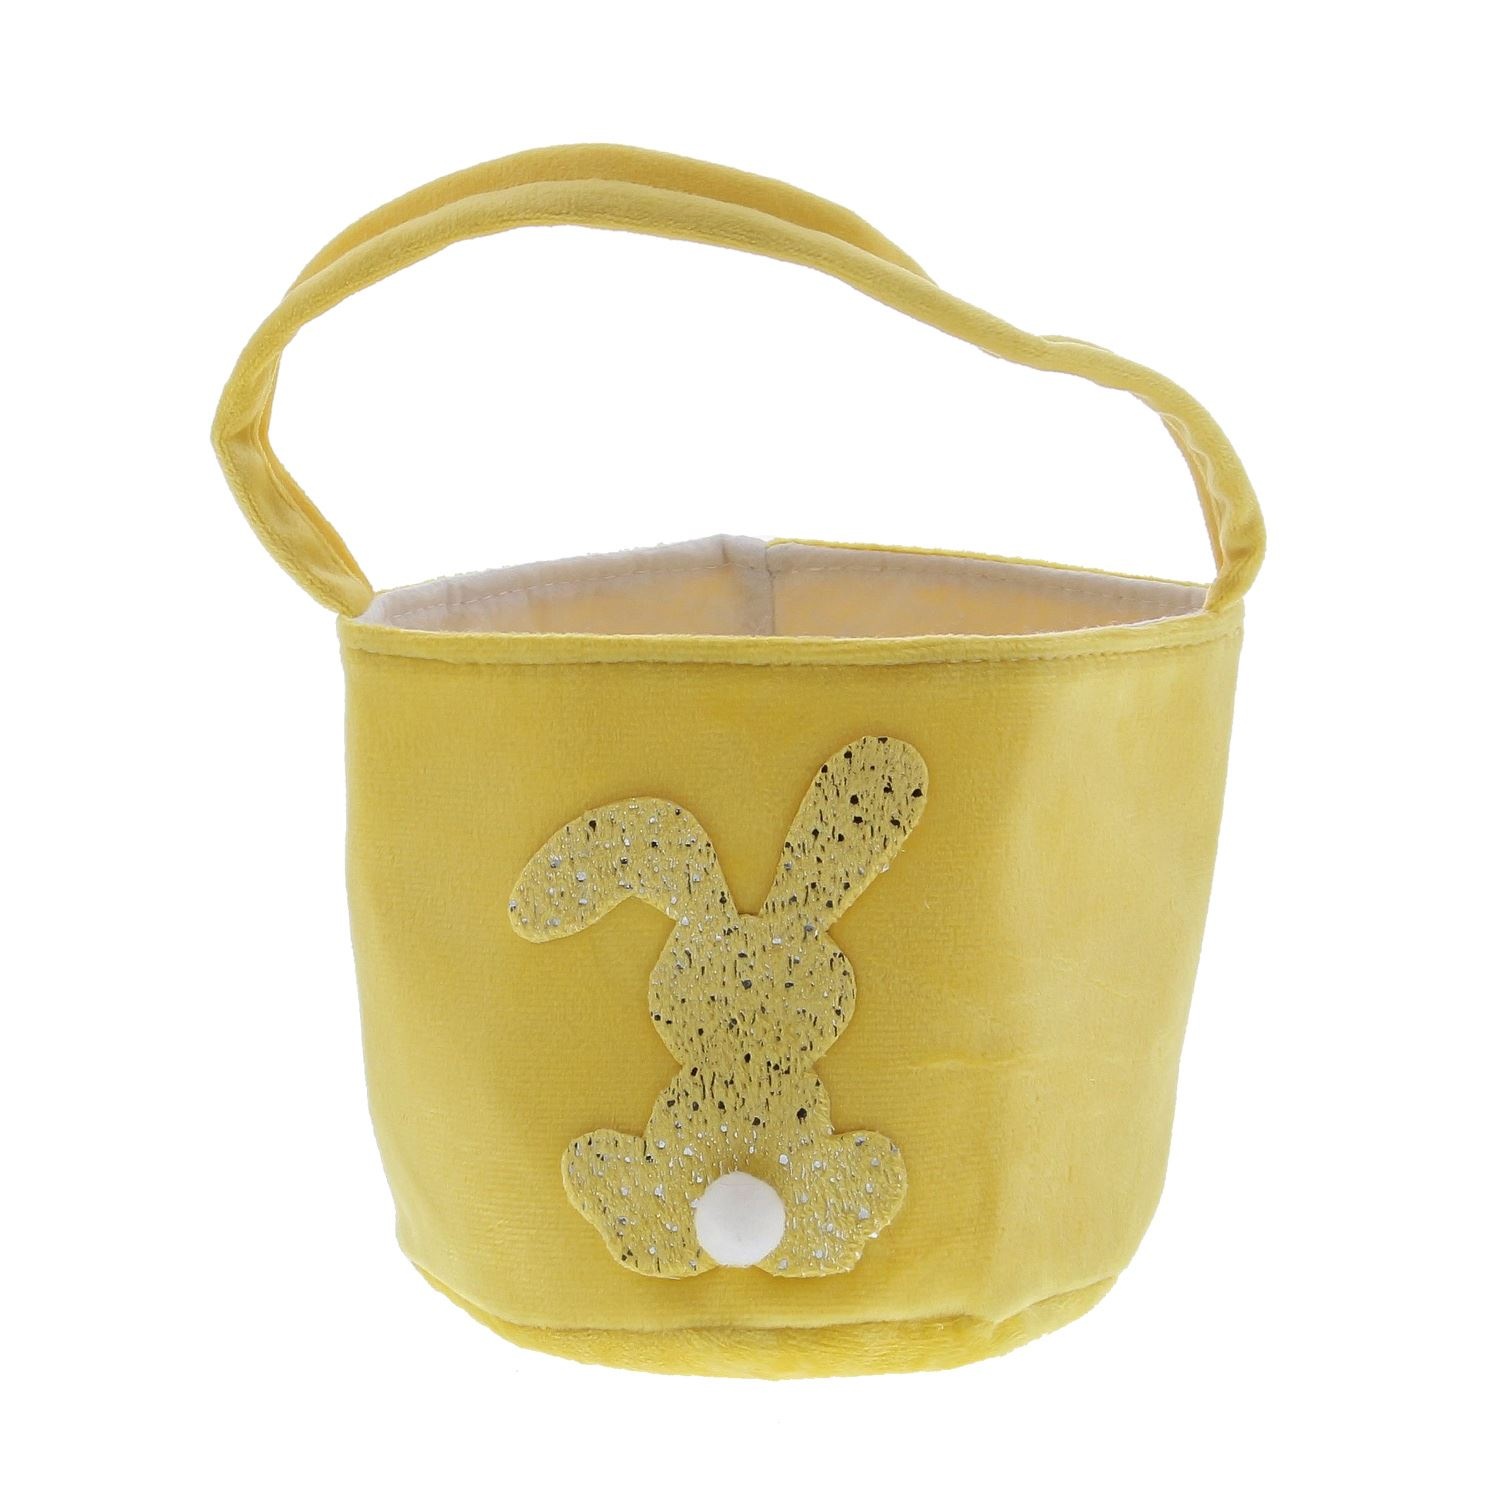 Rabbit "Glimpy" basket with handle high - yellow - 120*120*110 mm - 6 pieces